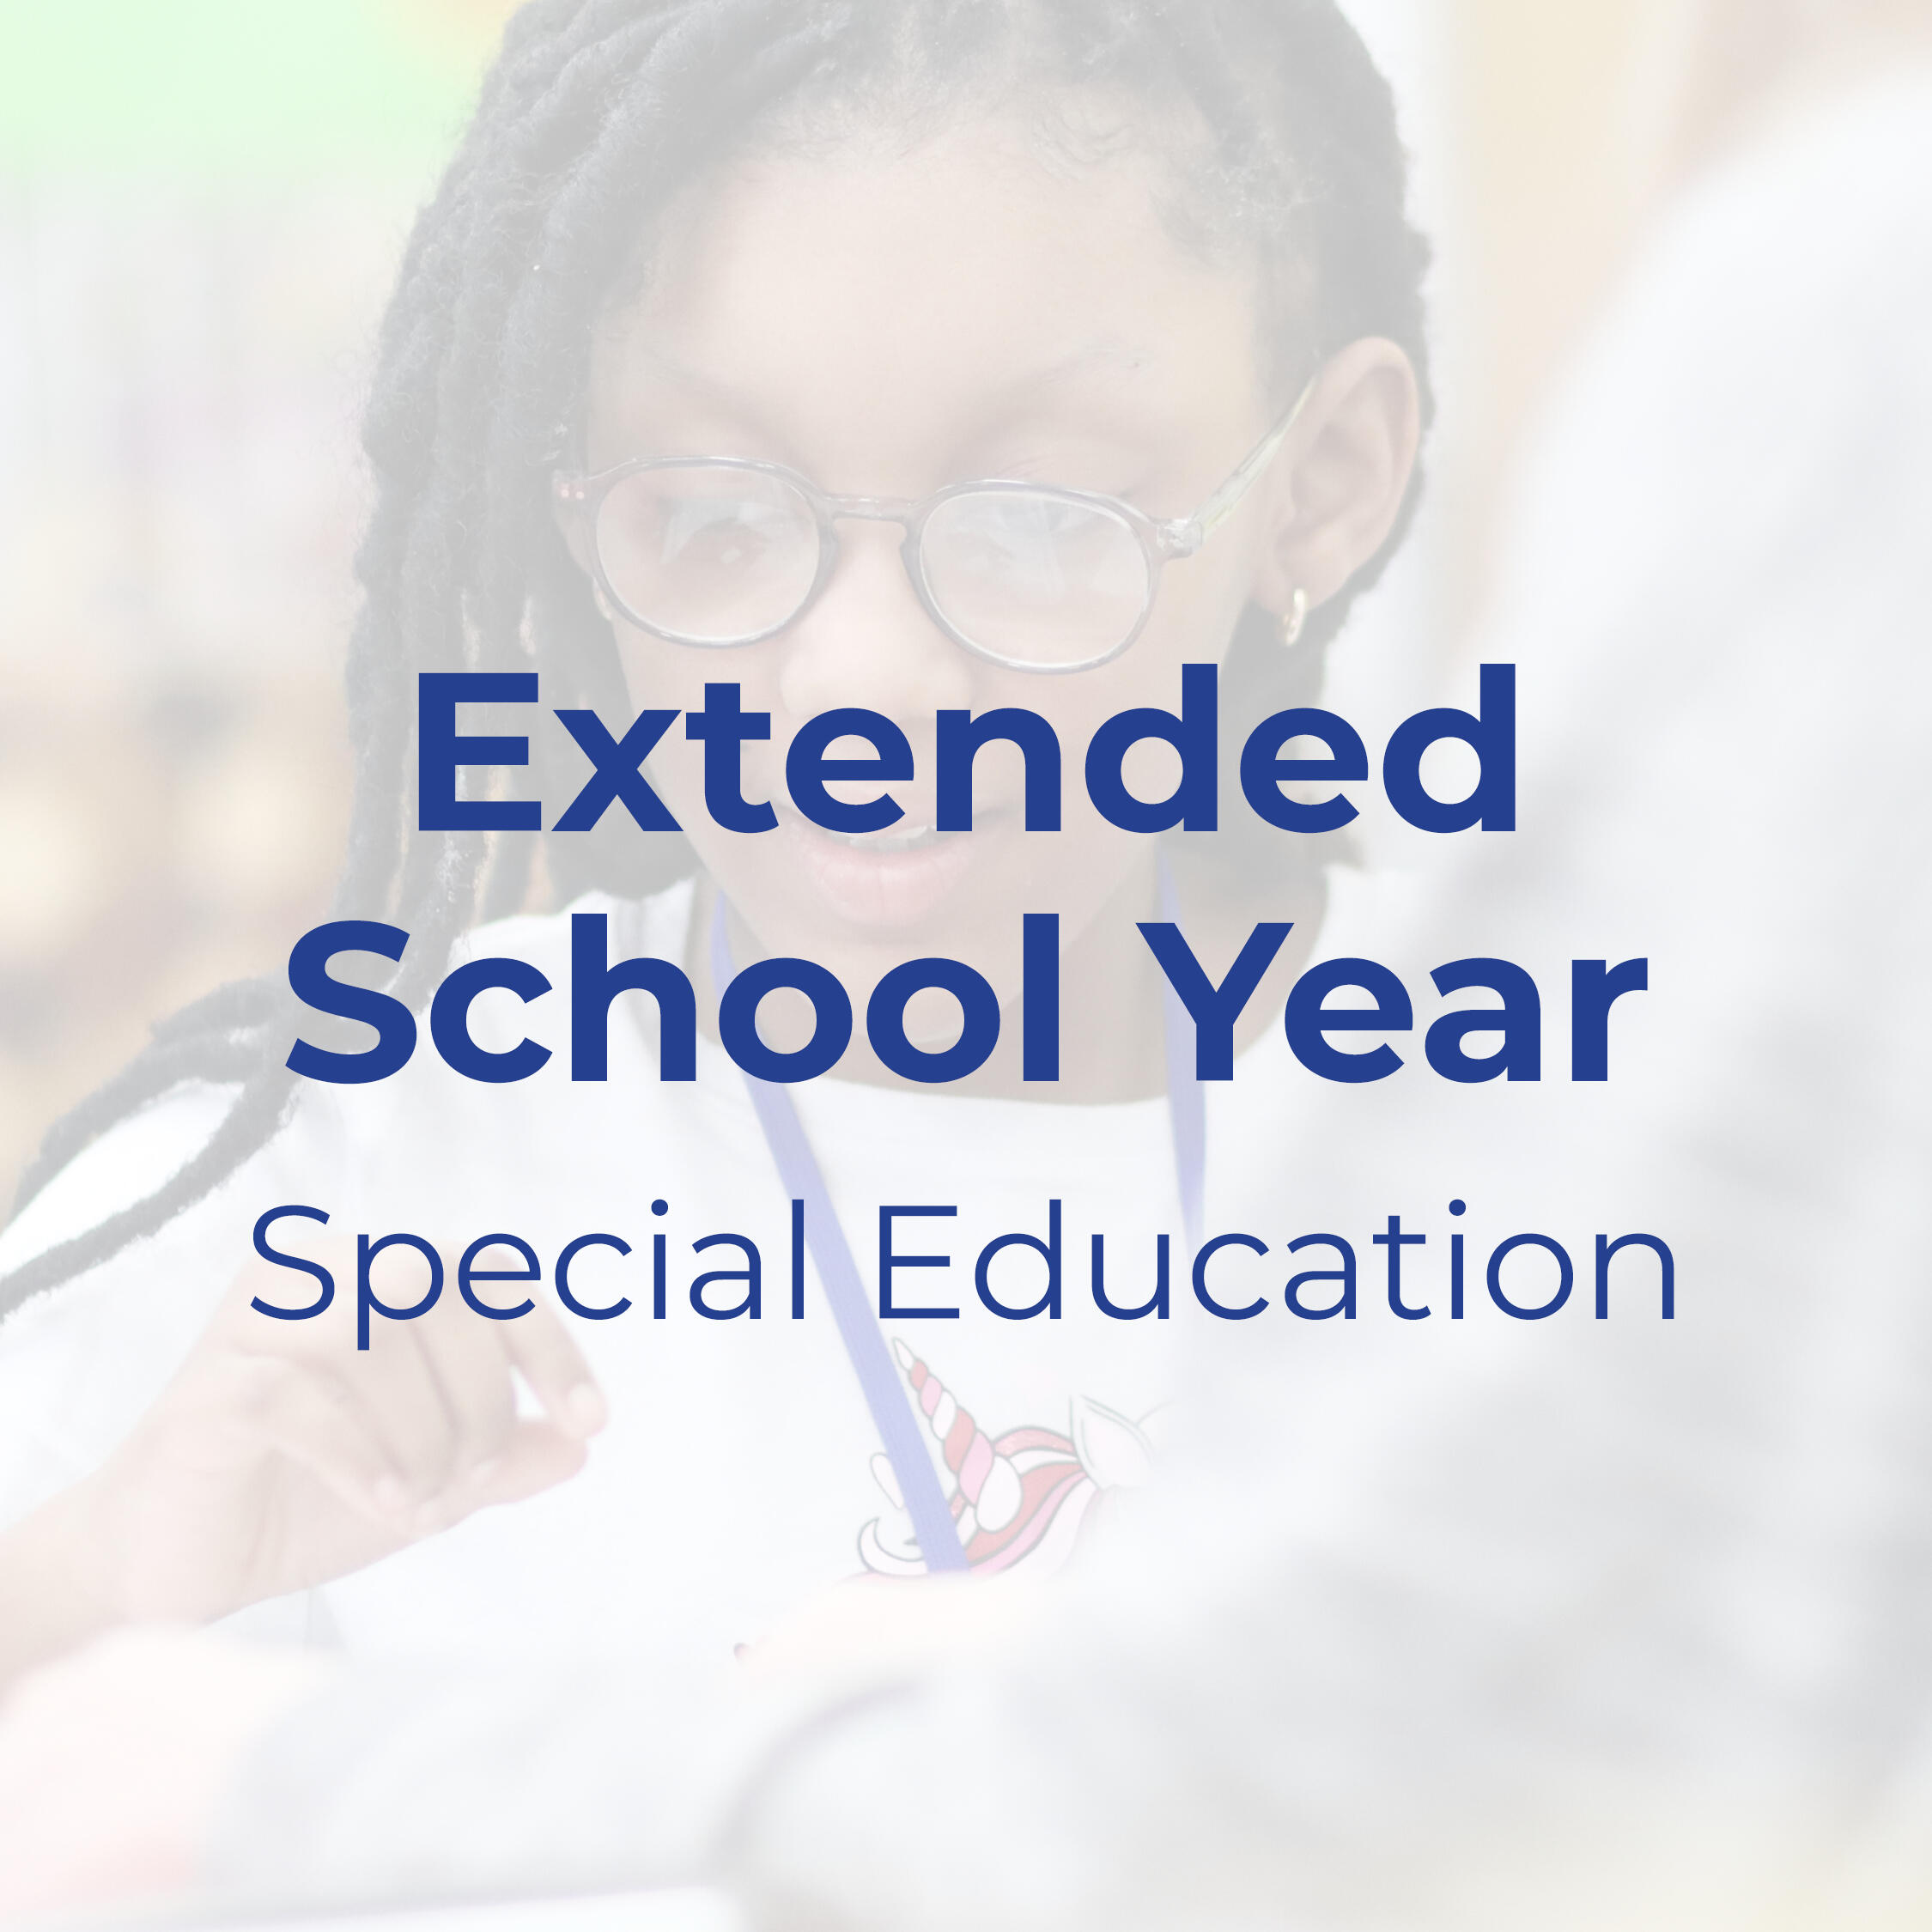 Text that reads "Extended School Year: Special Education"